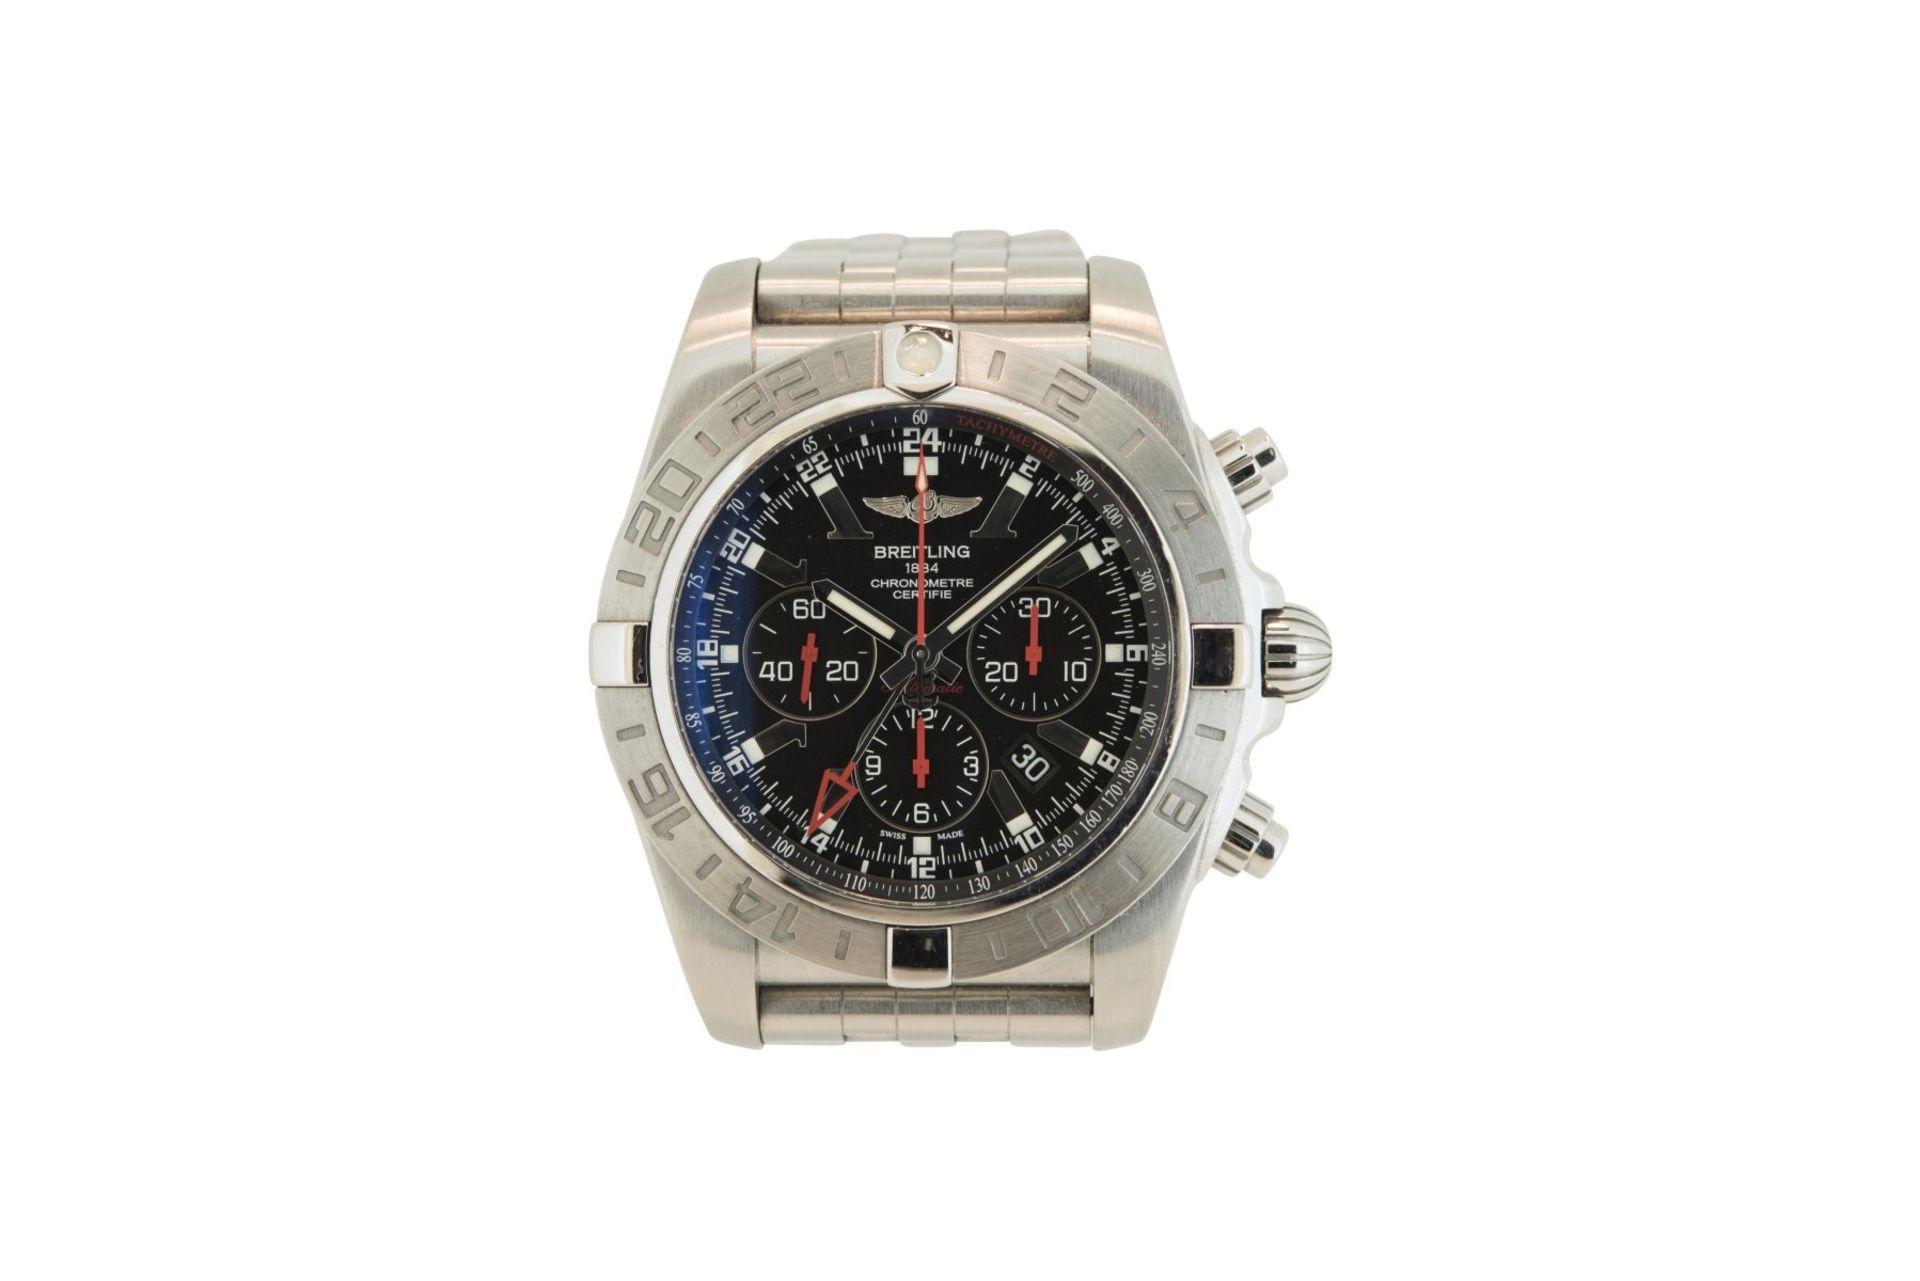 Breitling Chronomat GMT limited Edition